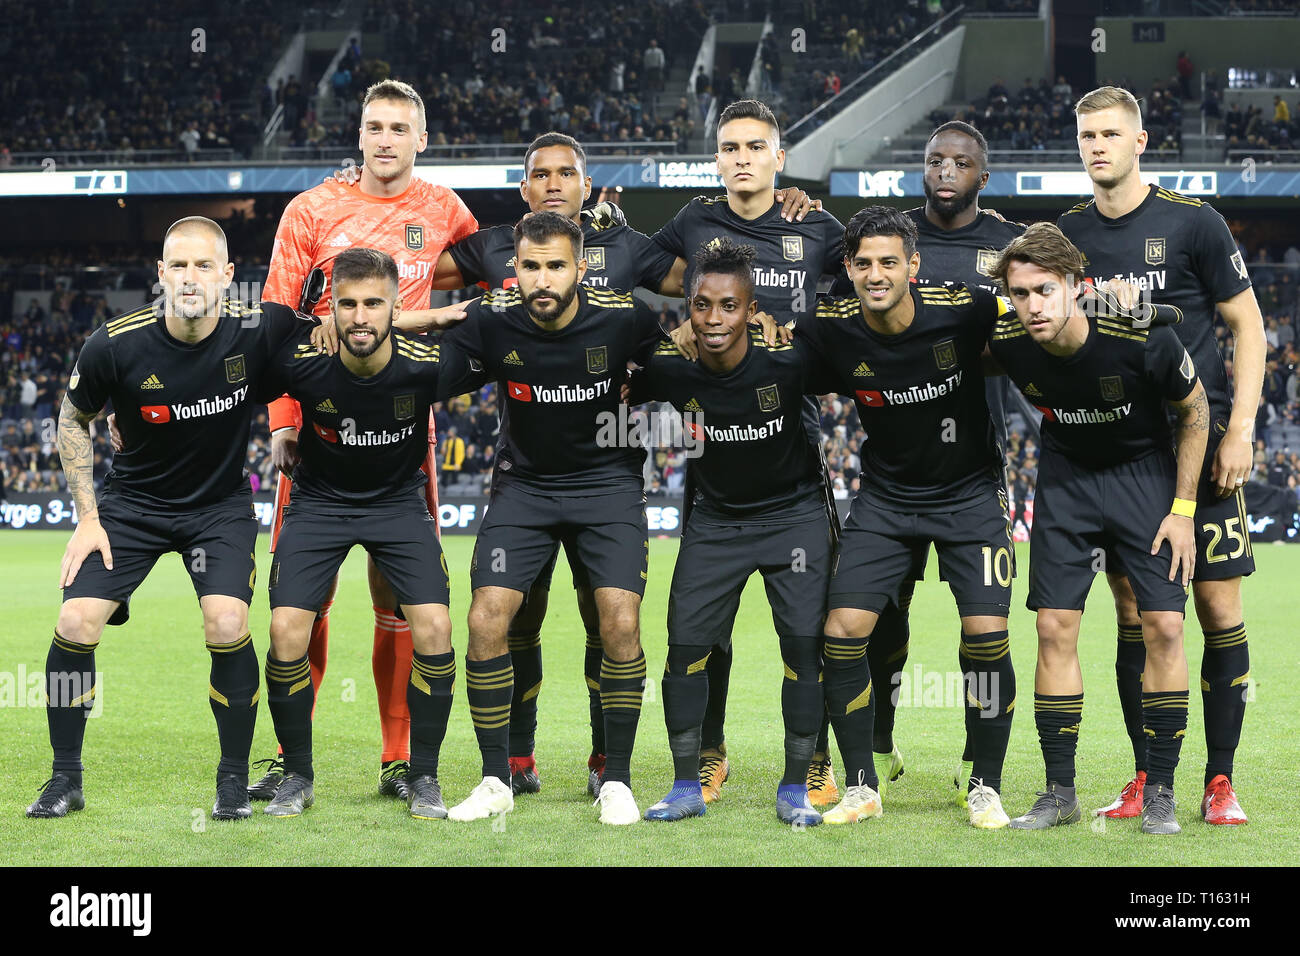 Los Angeles, CA, USA. 23rd Mar, 2019. LAFC starters pose for a